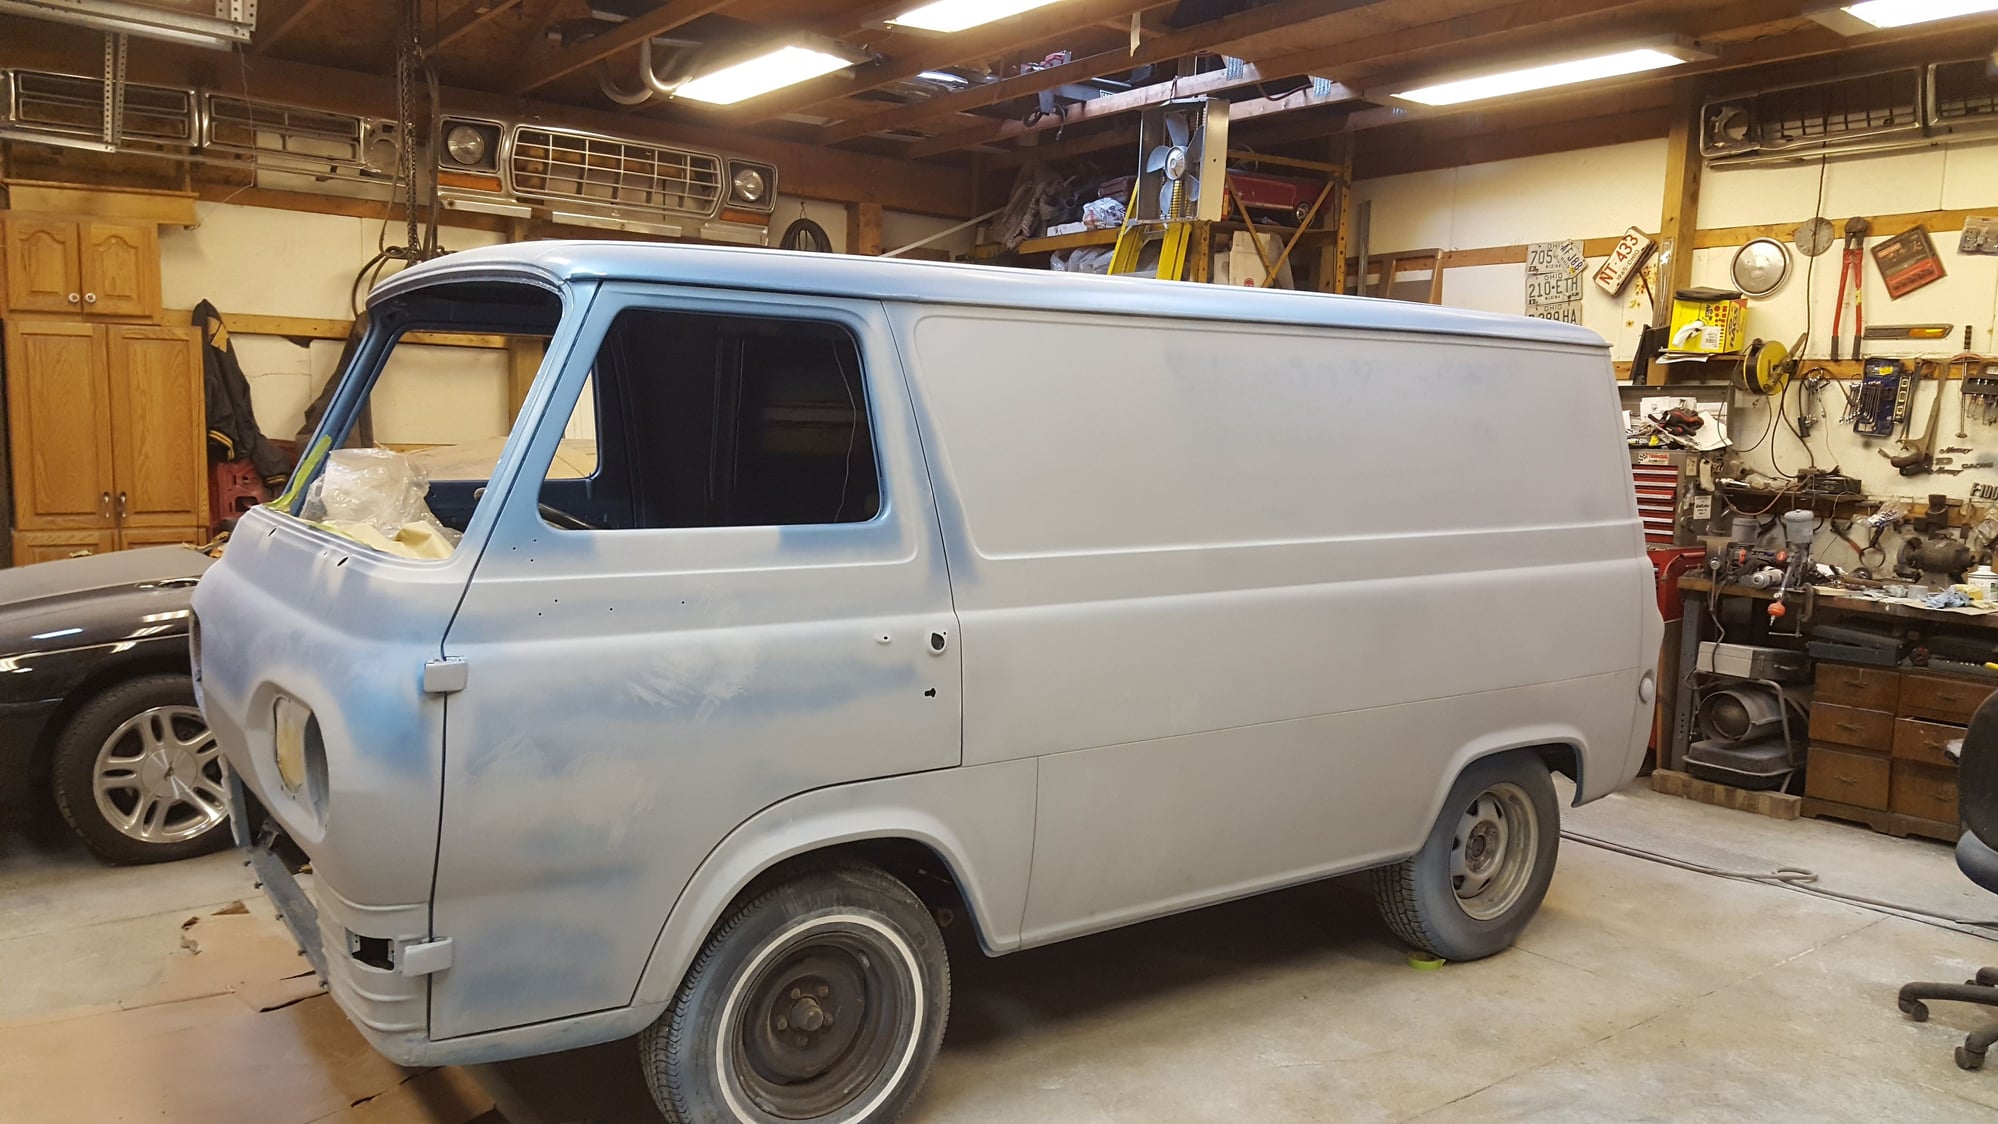 some pictures of my 63 Econoline - Ford Truck Enthusiasts Forums